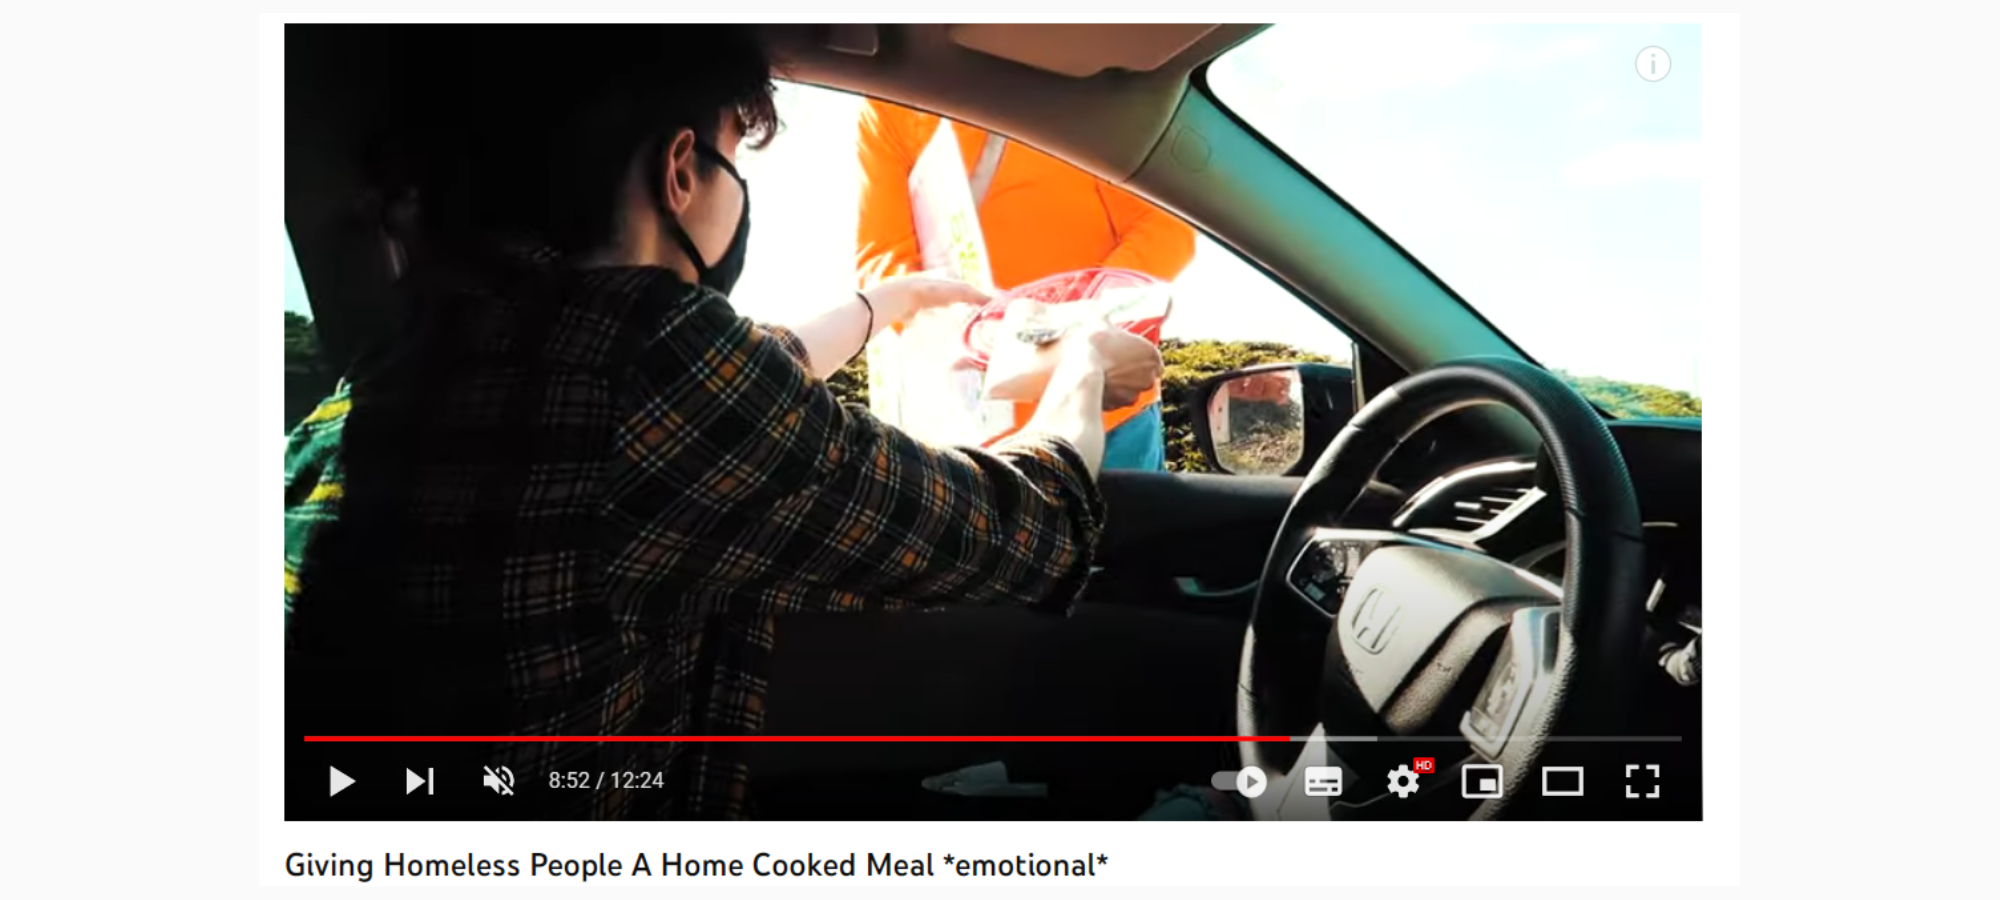 screenshot of youtube where a man hands out free food to people facing homelessness and films the process. He is sitting in a car and handing food out the window